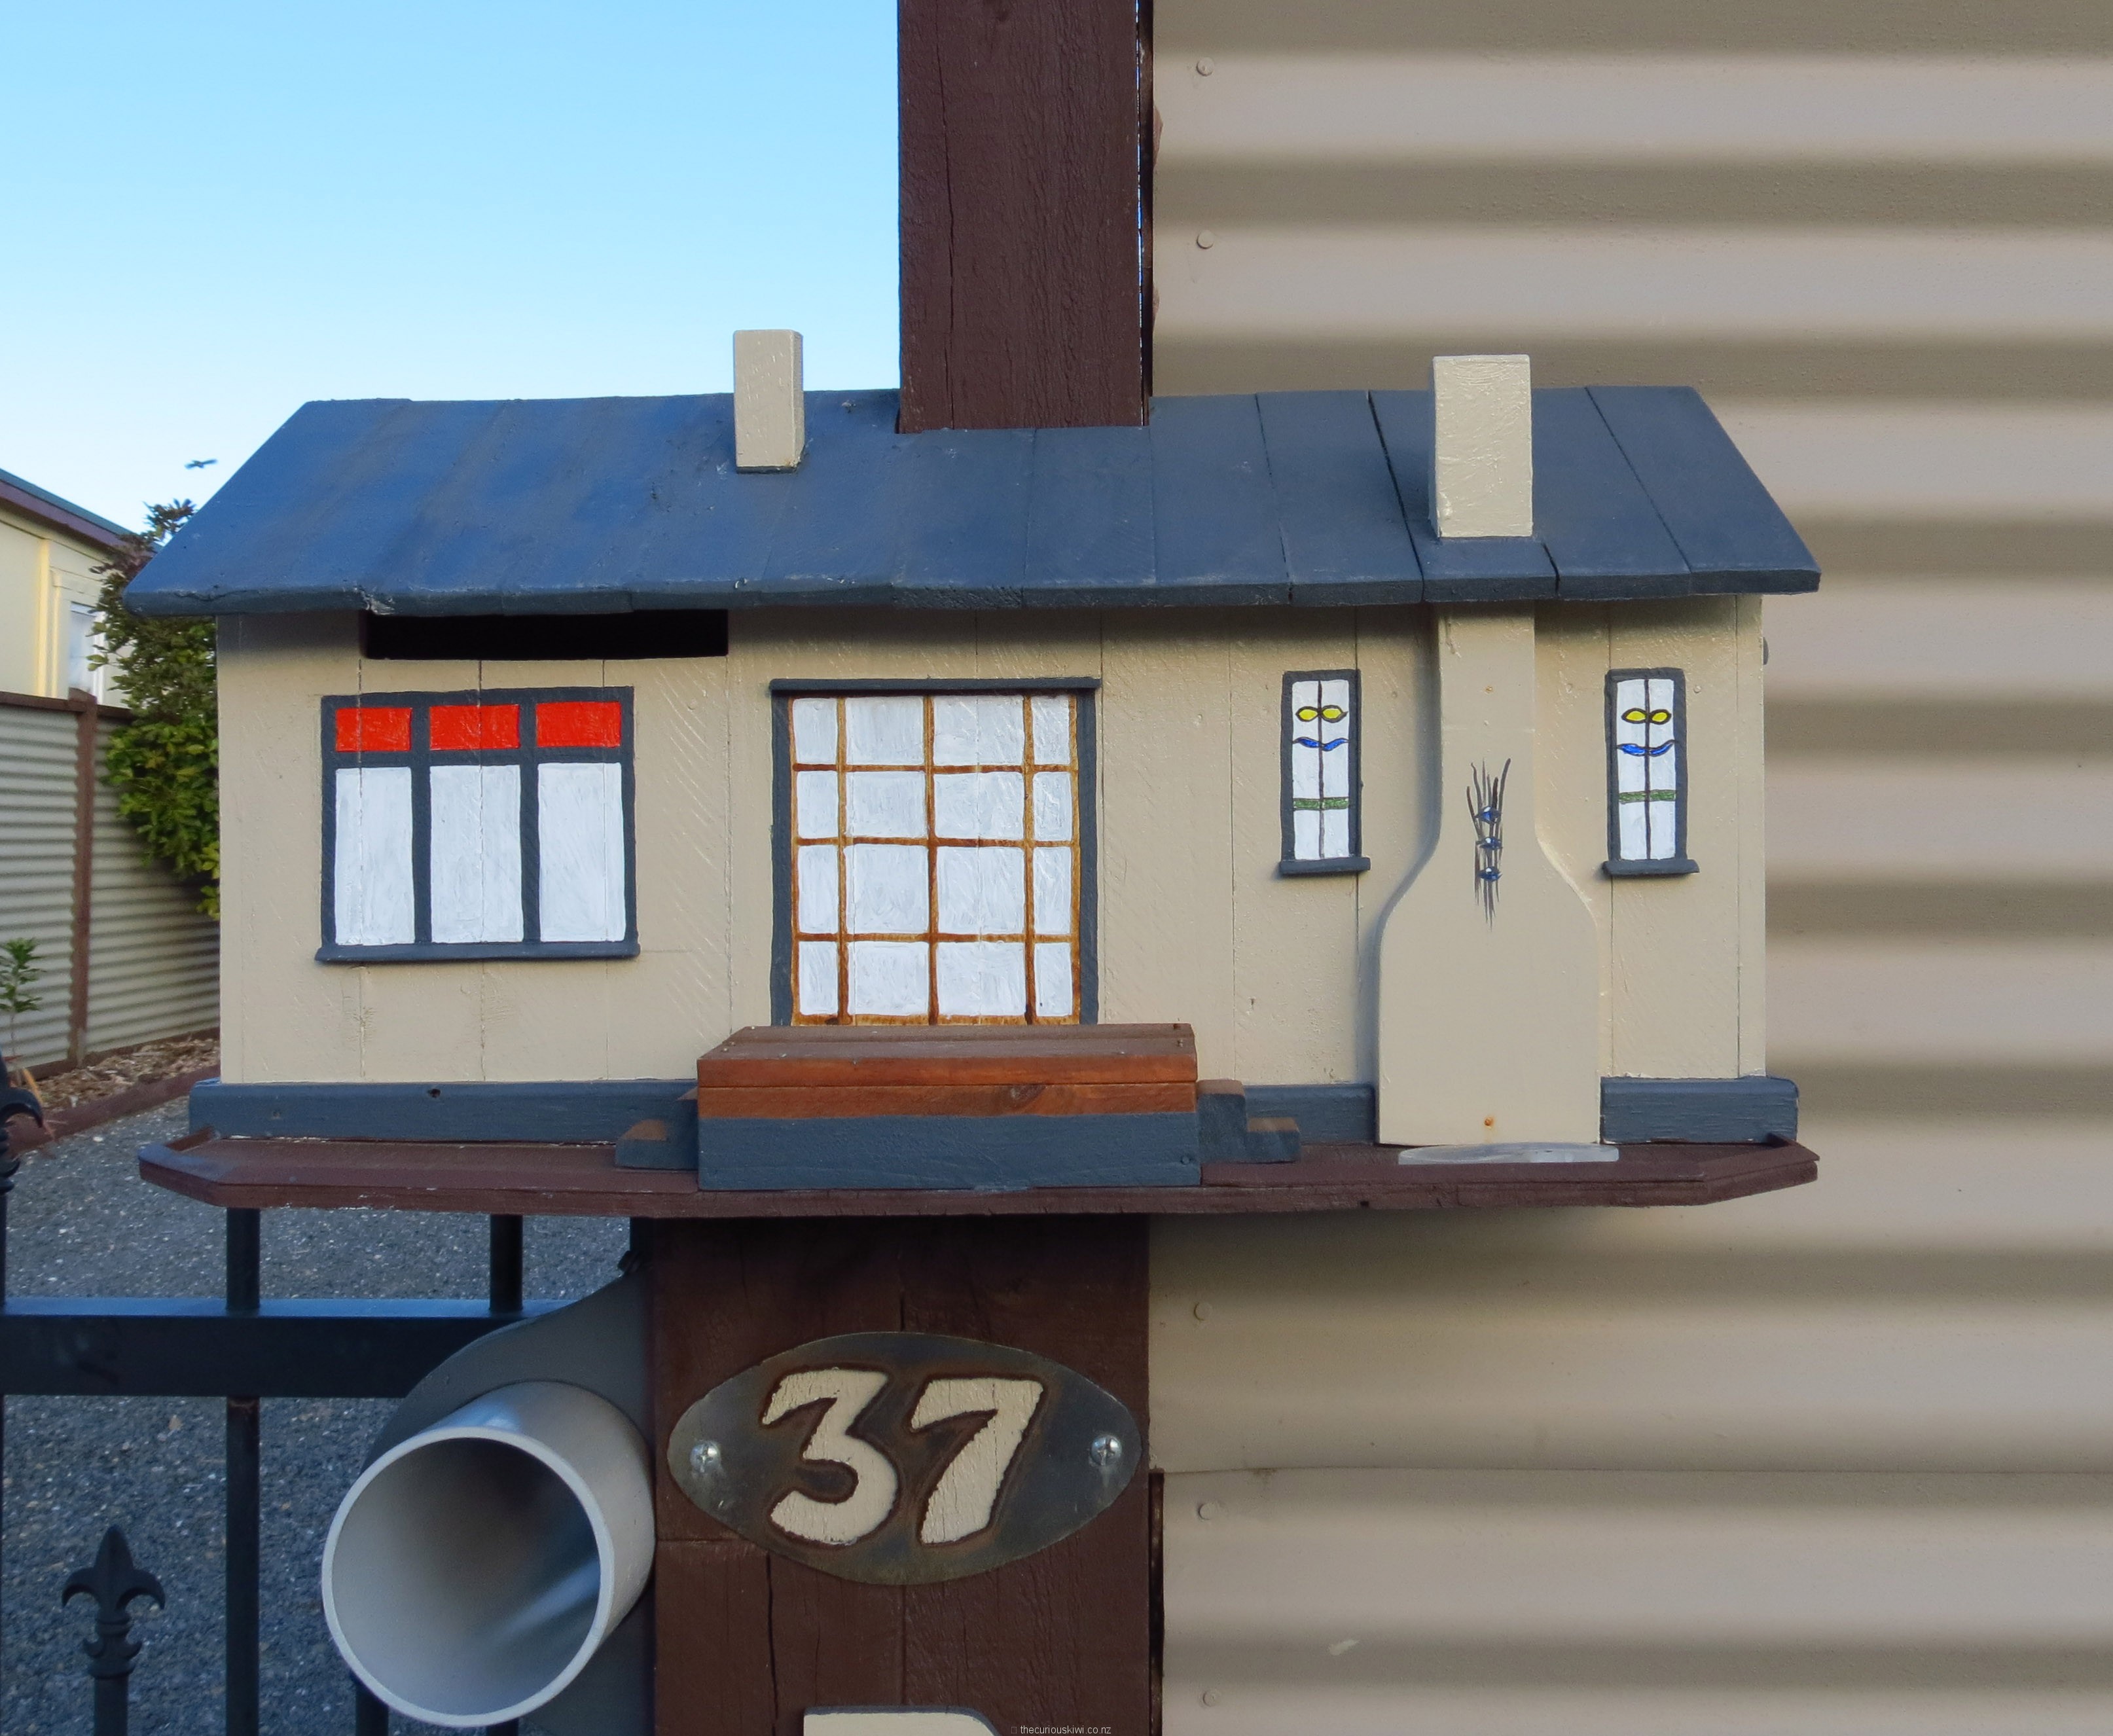 Another letter box house replica